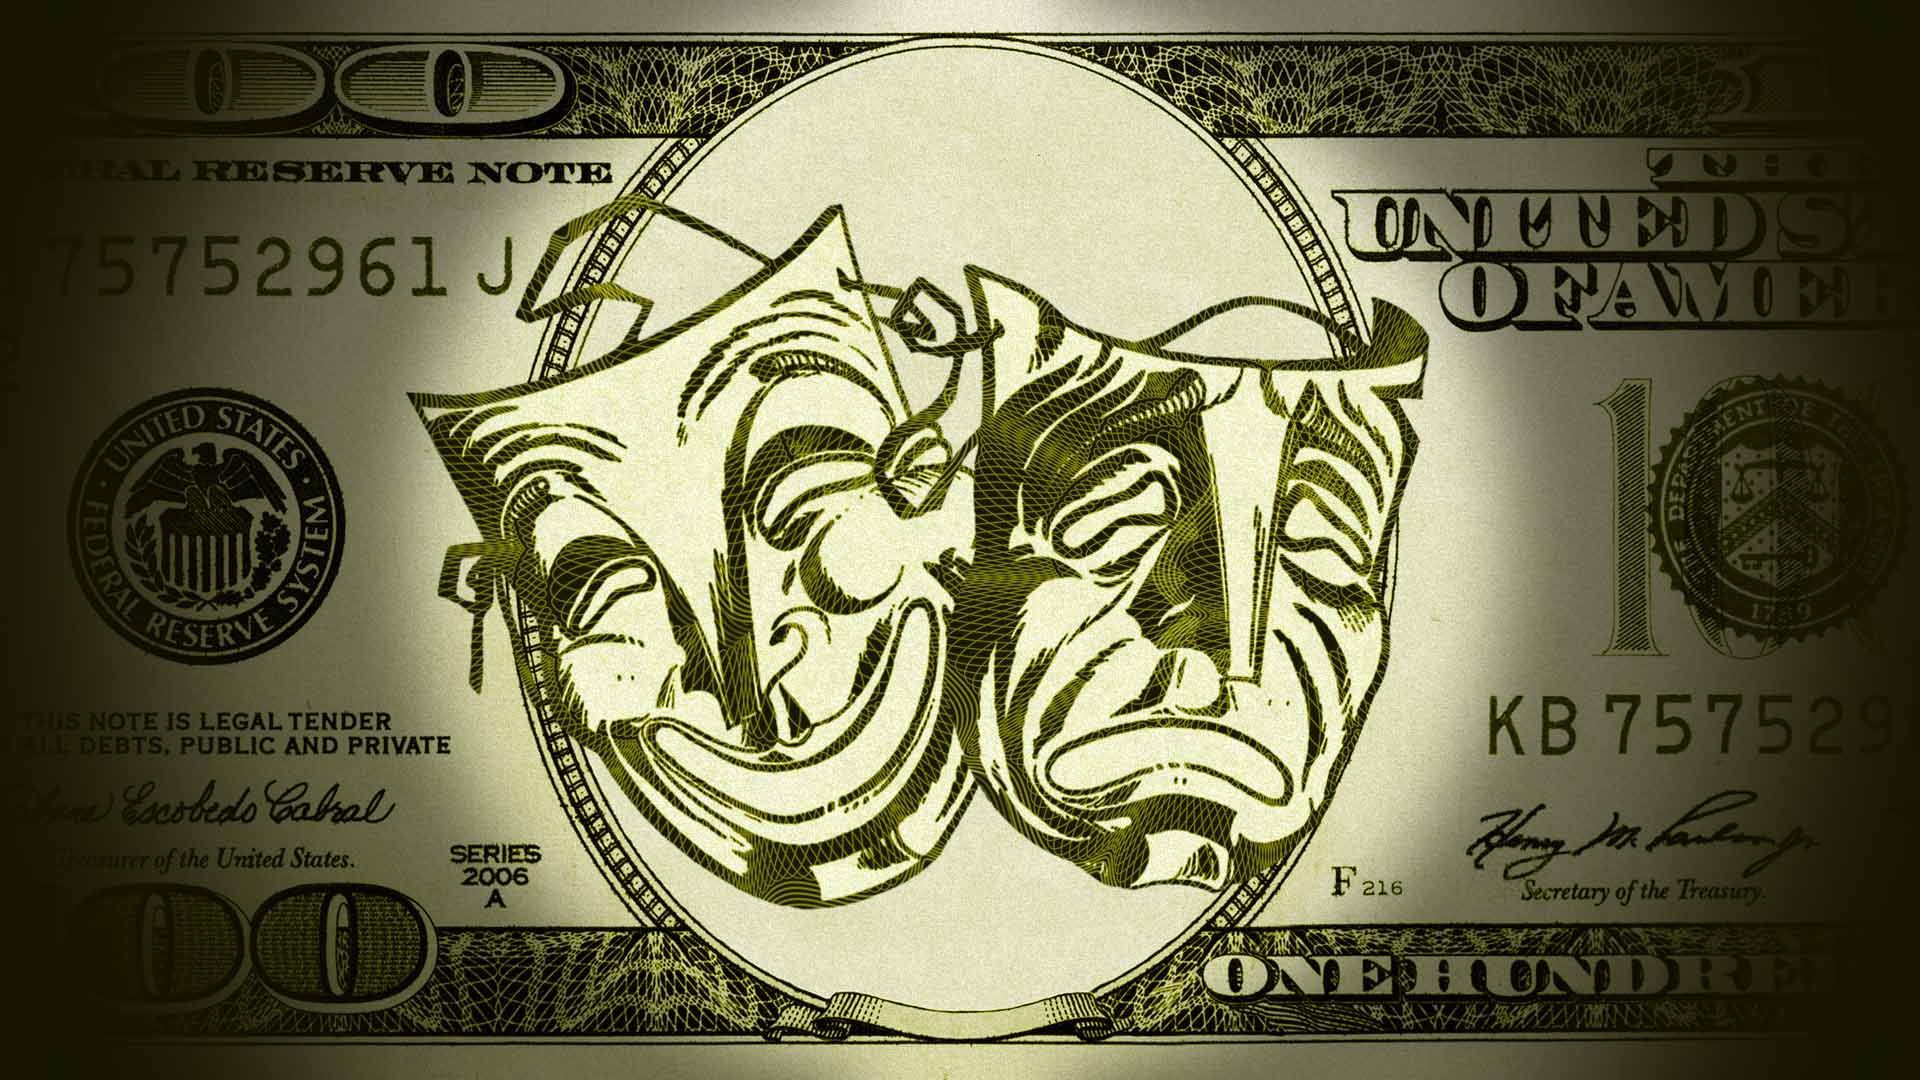 Illustration of a hundred dollar bill featuring drama and comedy masks in place of Benjamin Franklin